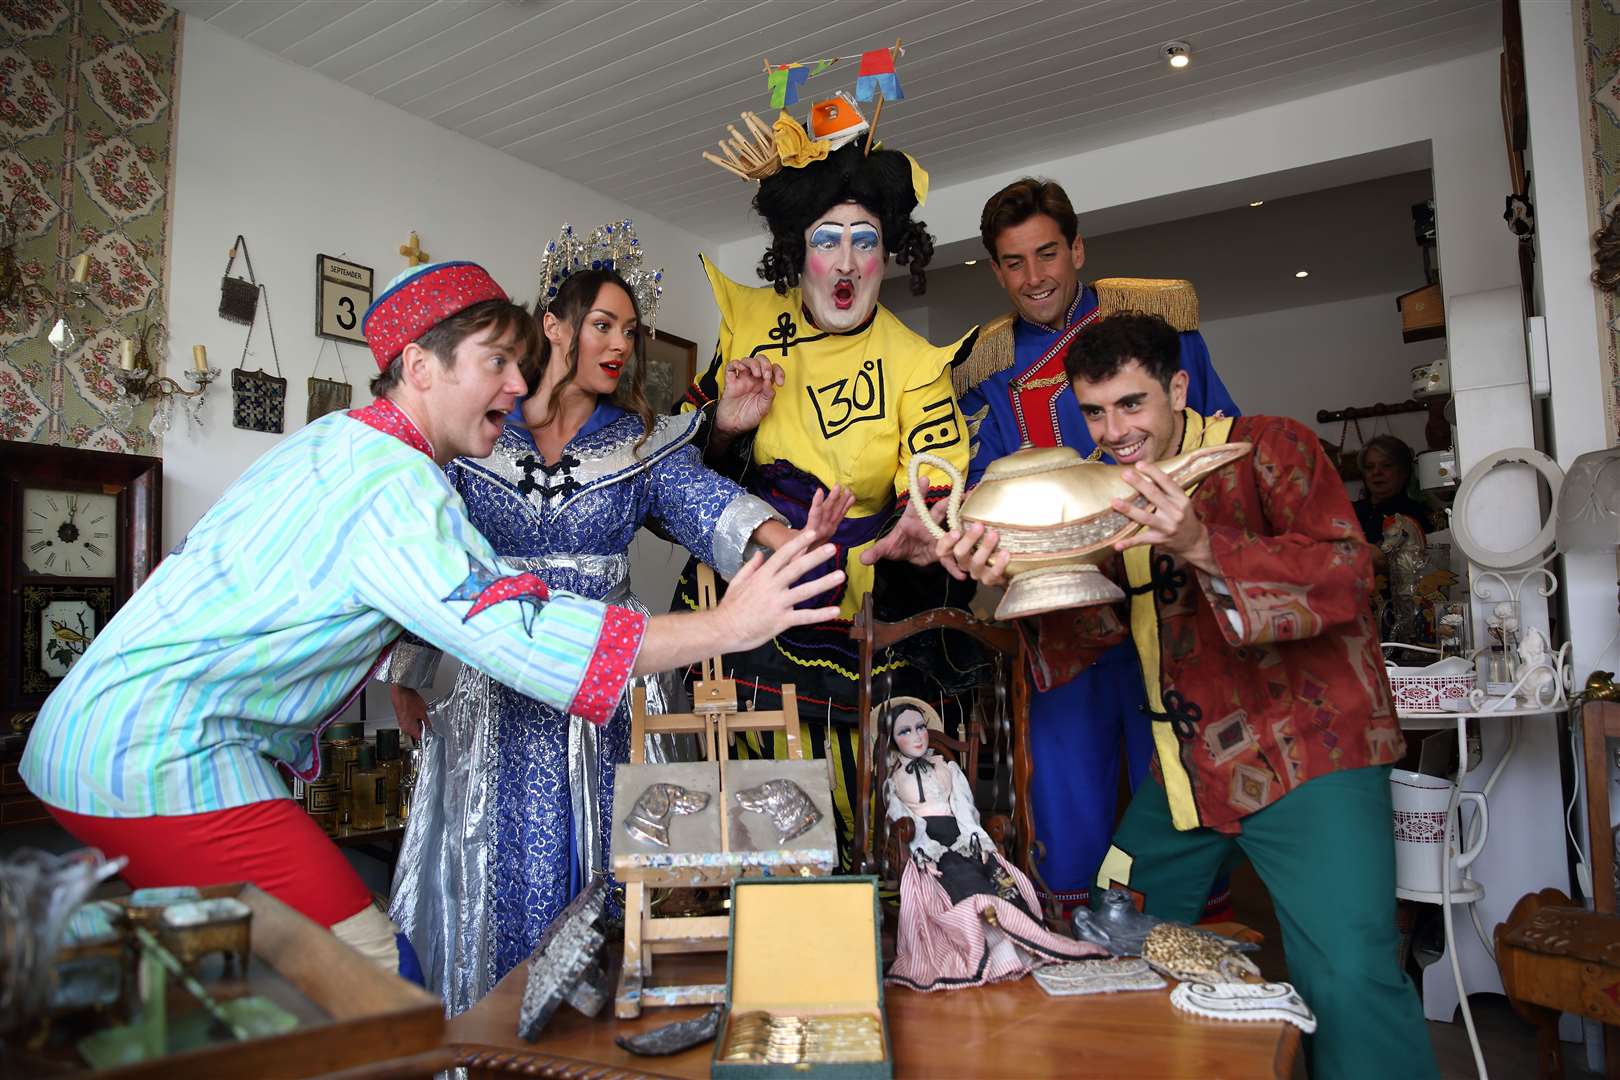 The Aladdin panto cast from Gravesend’s Woodville has been raiding nearby shops in search of an old magic lamp